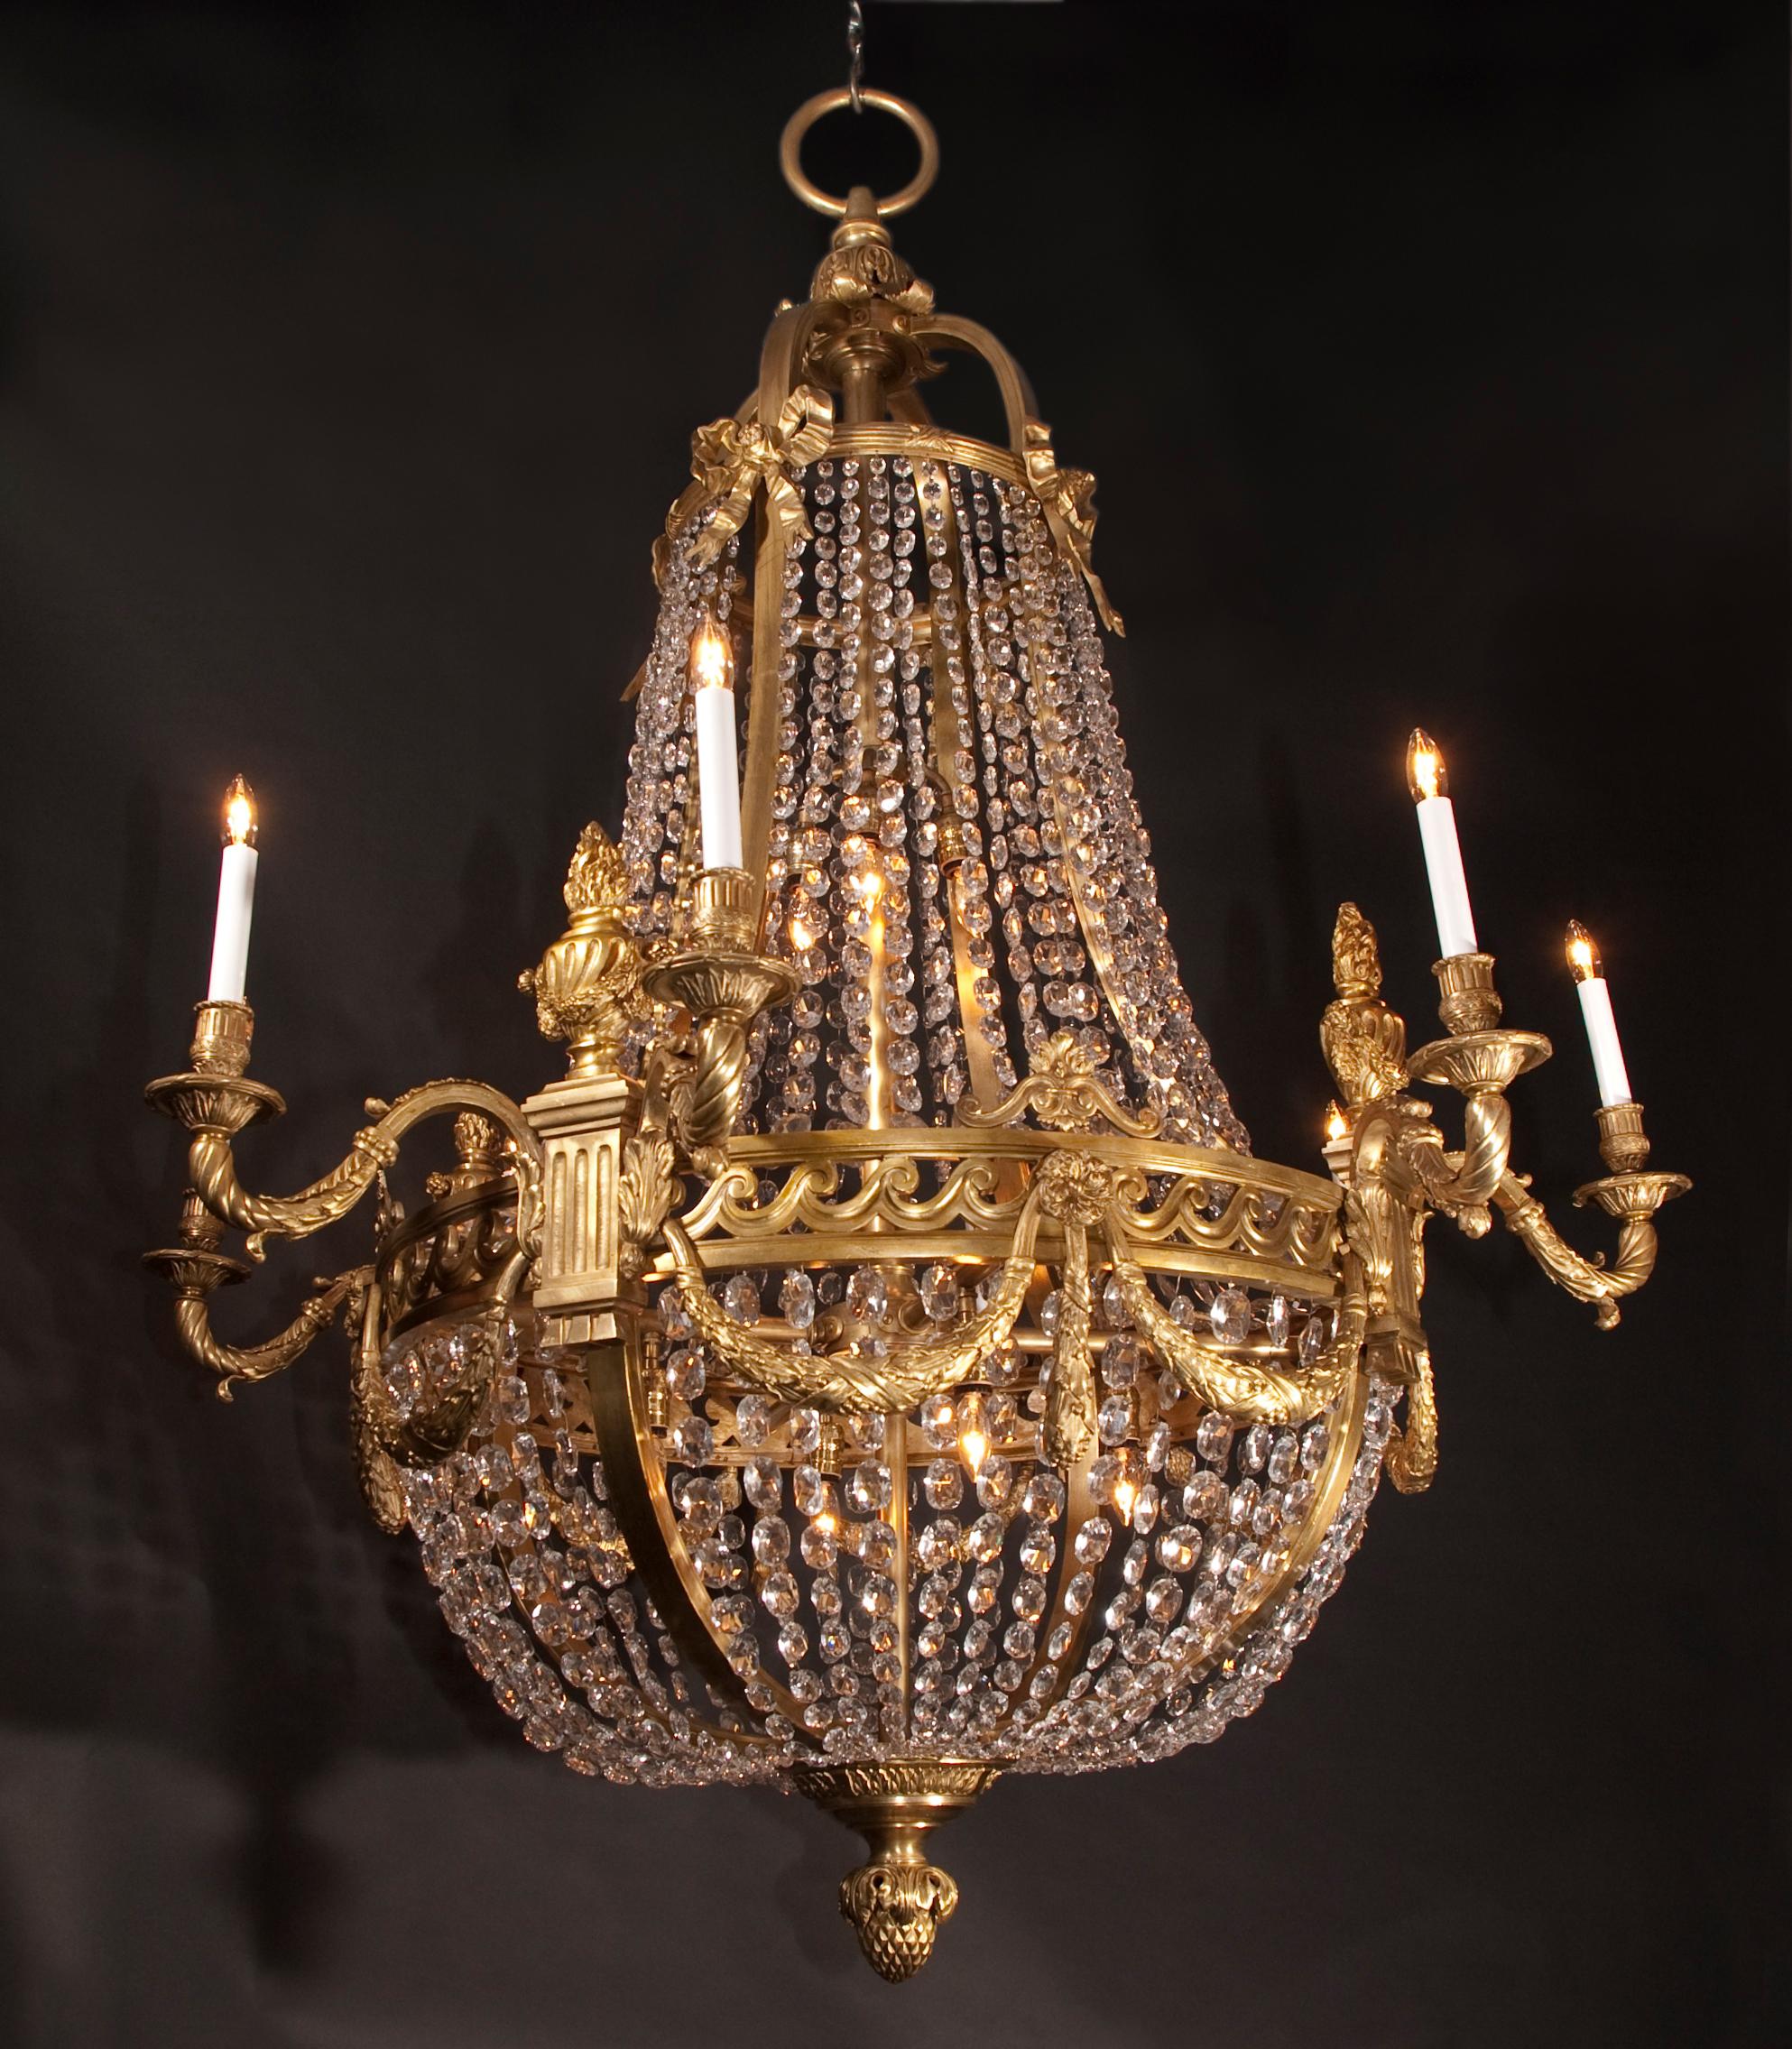 These beautiful, Grand Louis XVI chandeliers are made of bronze and draped with rows of octagonal crystals. The French antique pair dates back to the 19th century and offers details in plenty; the crown is a group of acanthus leaves, cascading to a